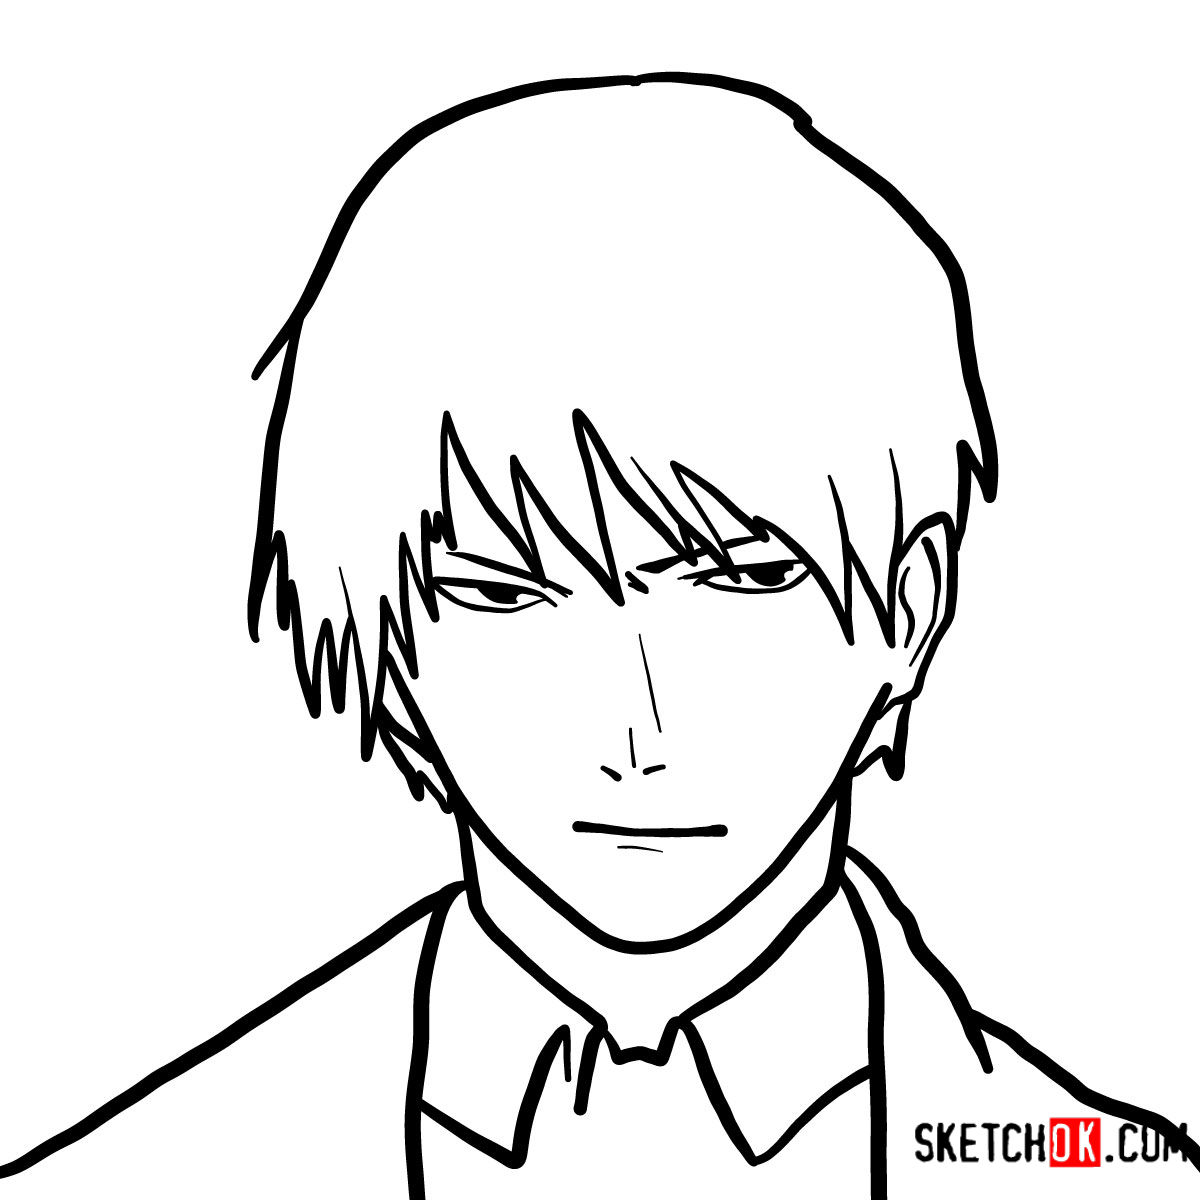 How to draw Roy Mustang's face | Fullmetal Alchemist